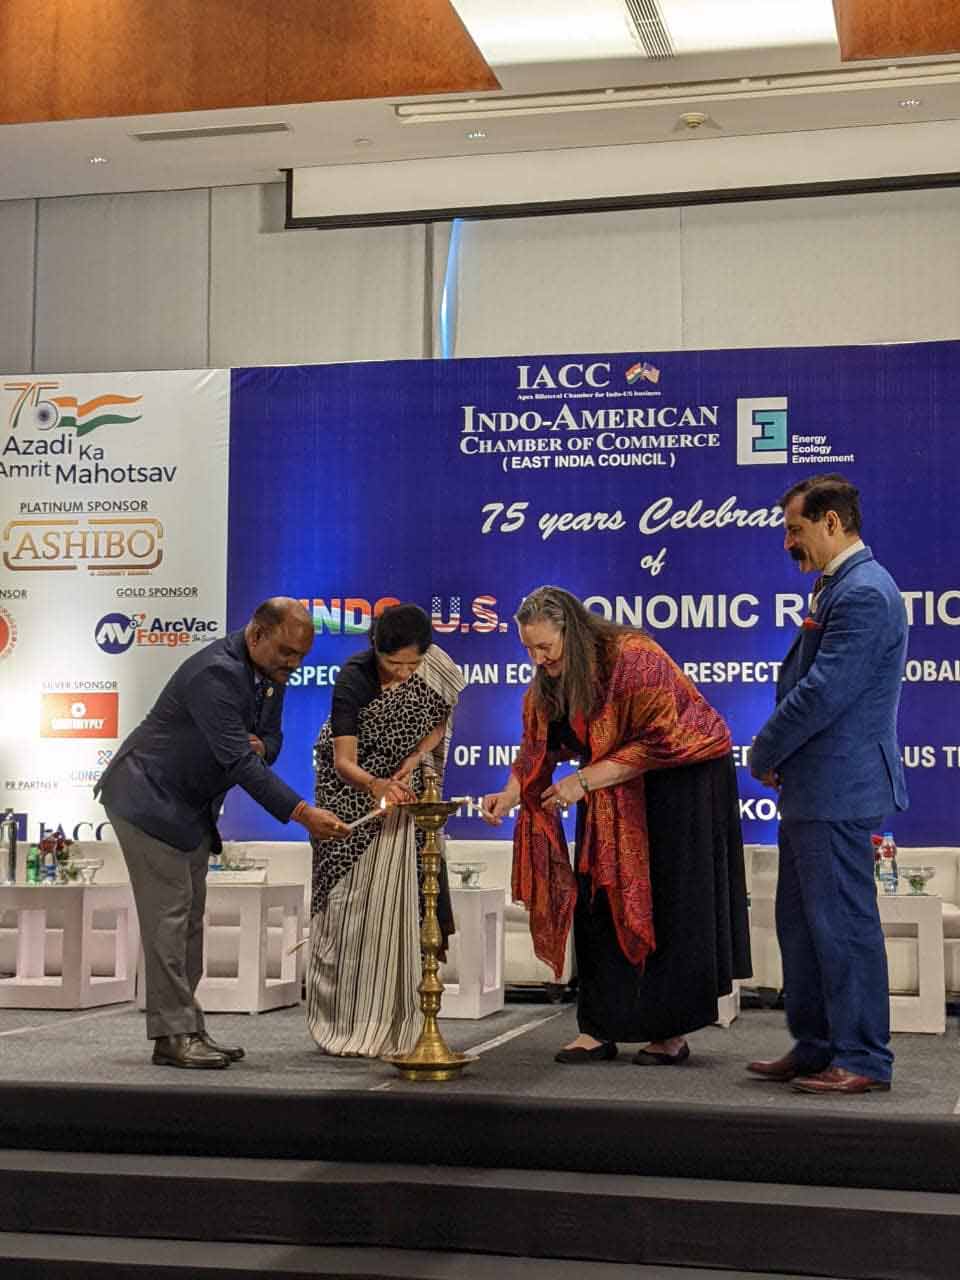 US consul general Melinda Pavek inaugurates a conclave hosted by the Indo-American Chamber of Commerce, Eastern Region Council, on Wednesday. The conclave has been organised to celebrate 75 years of the 'economic relationship' between the US and India.